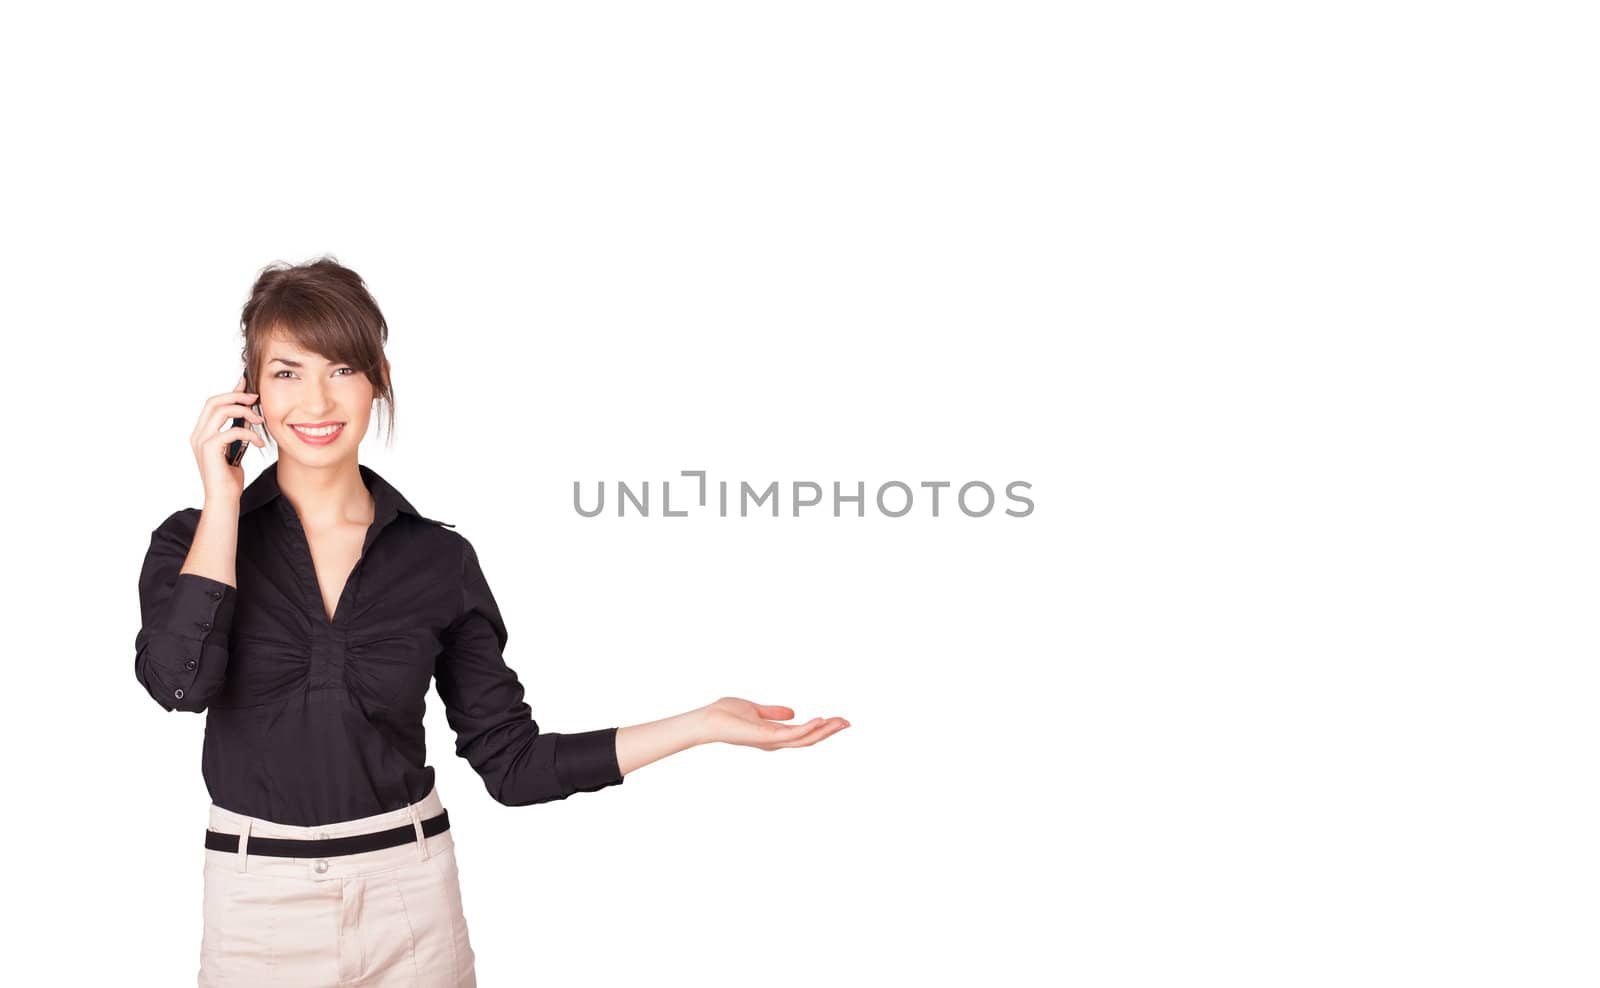 young woman presenting white copy space isolated on white